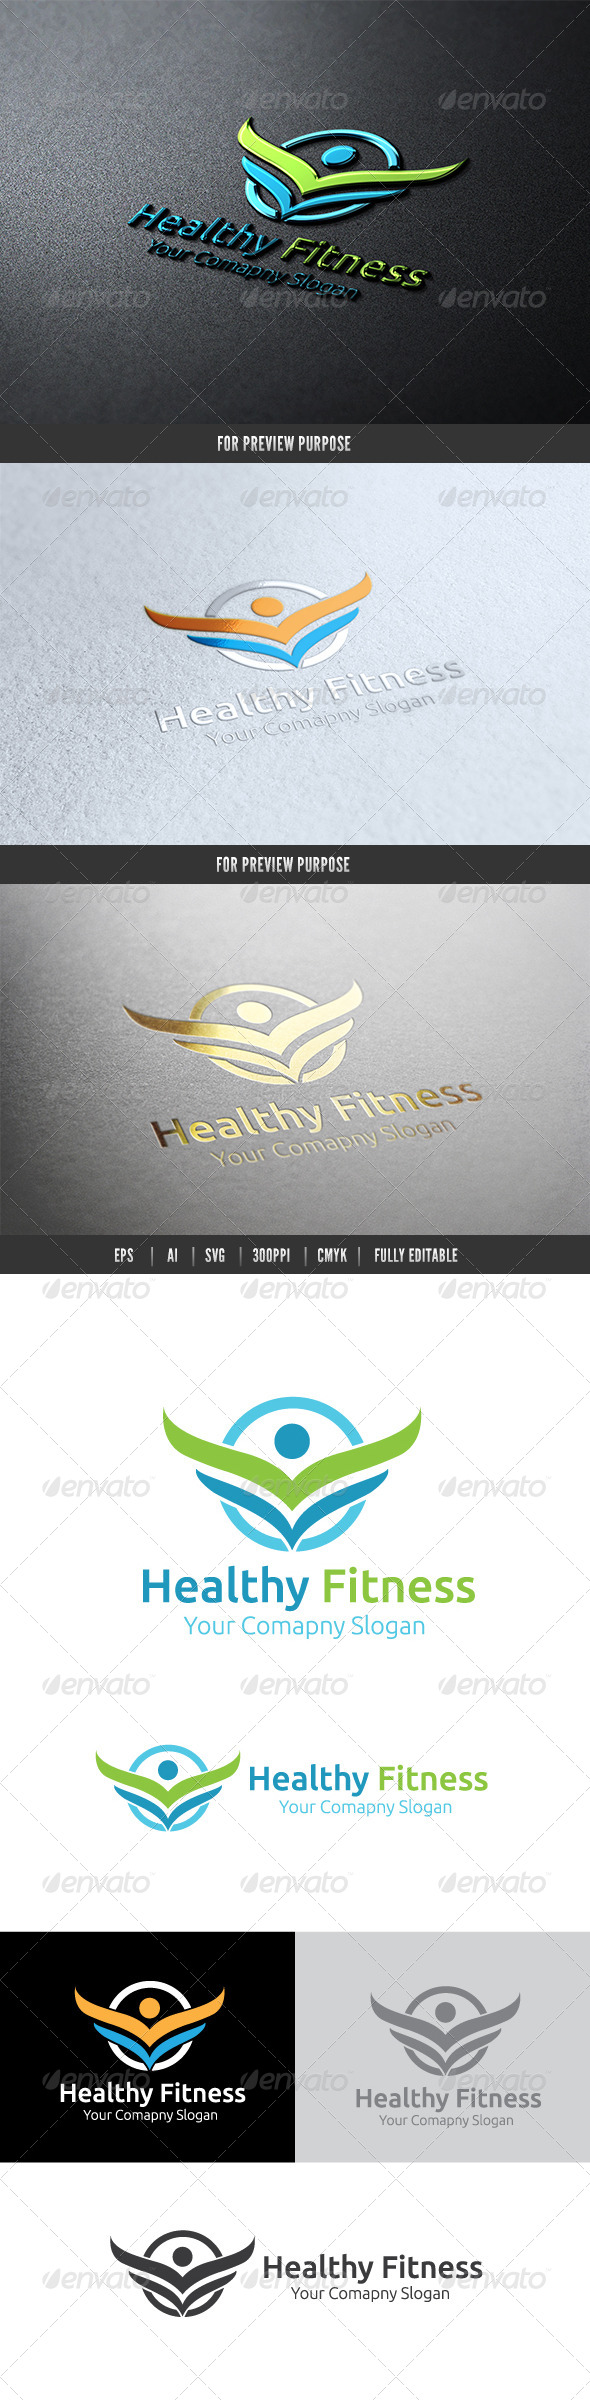 Healthy Fitness